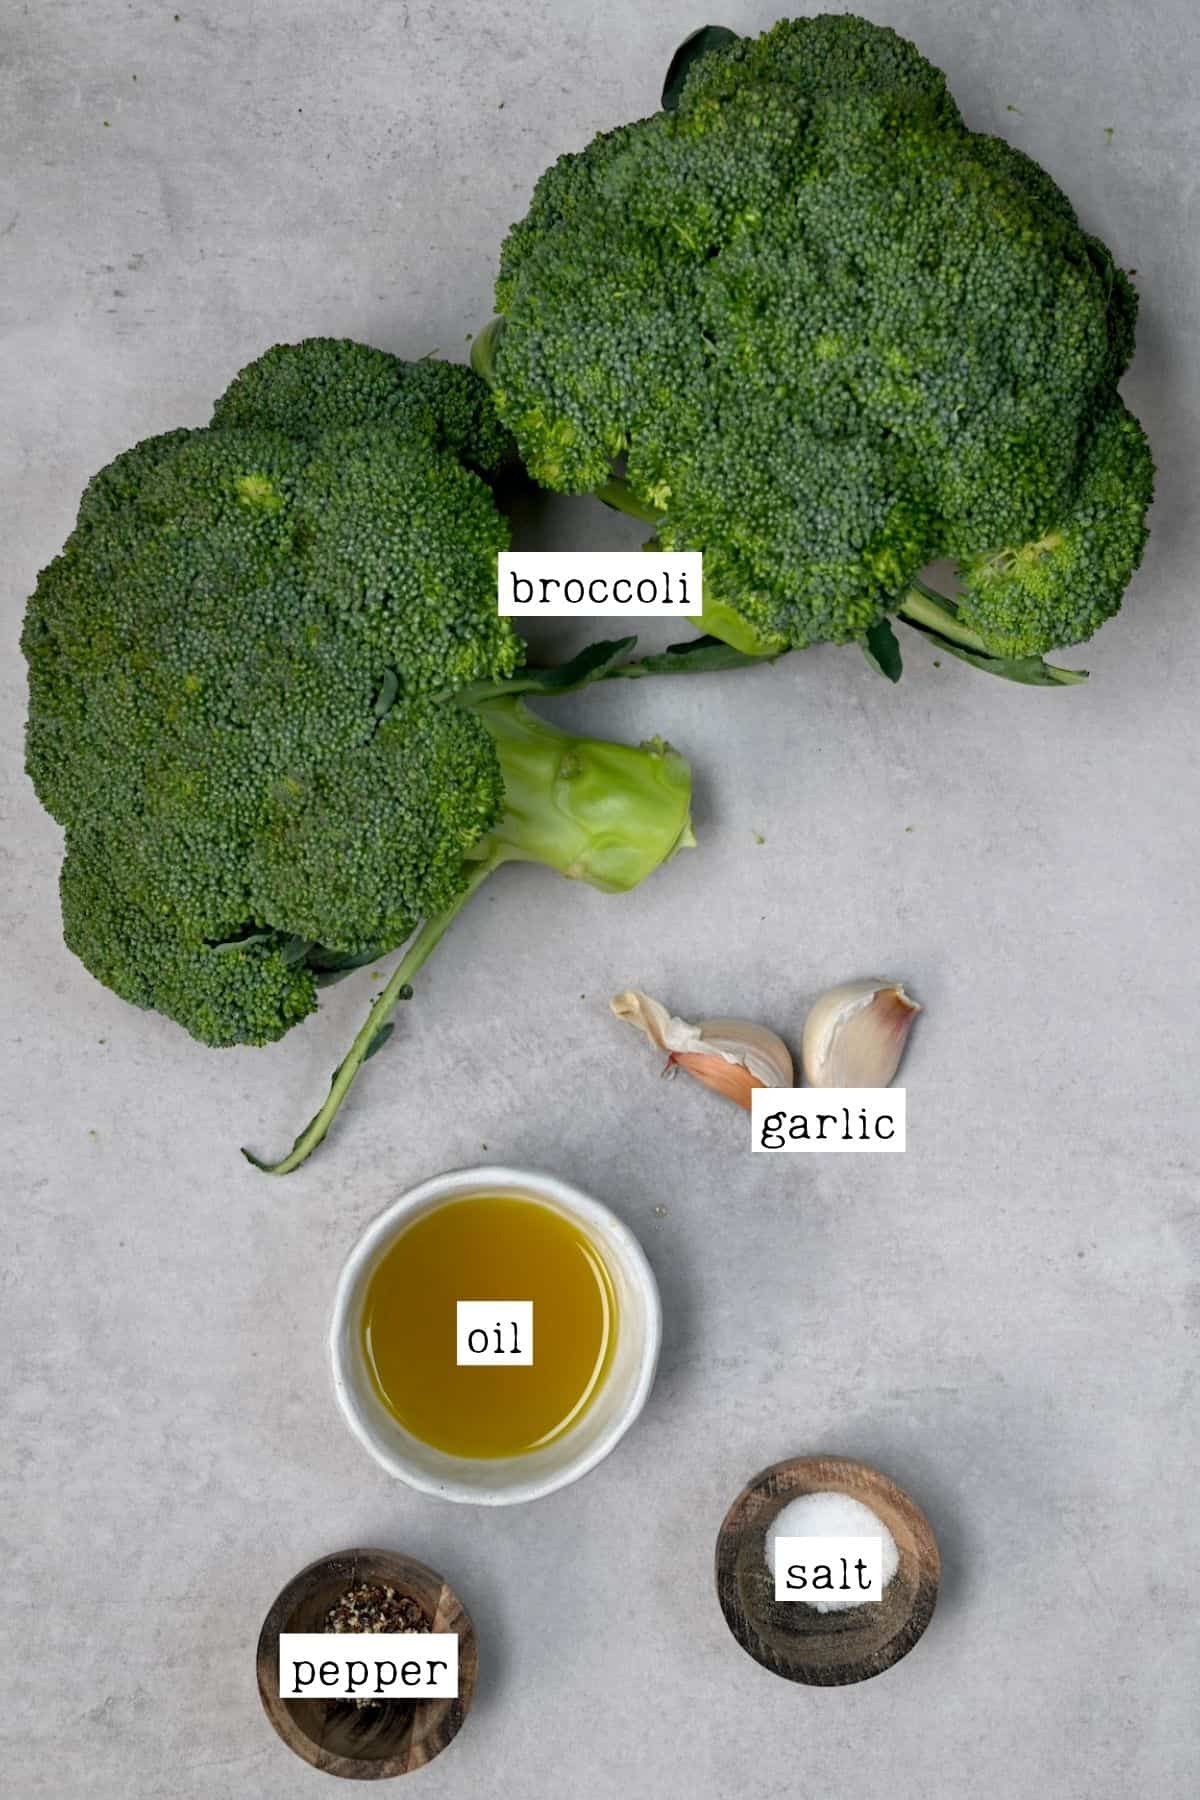 Ingredients for grilled broccoli